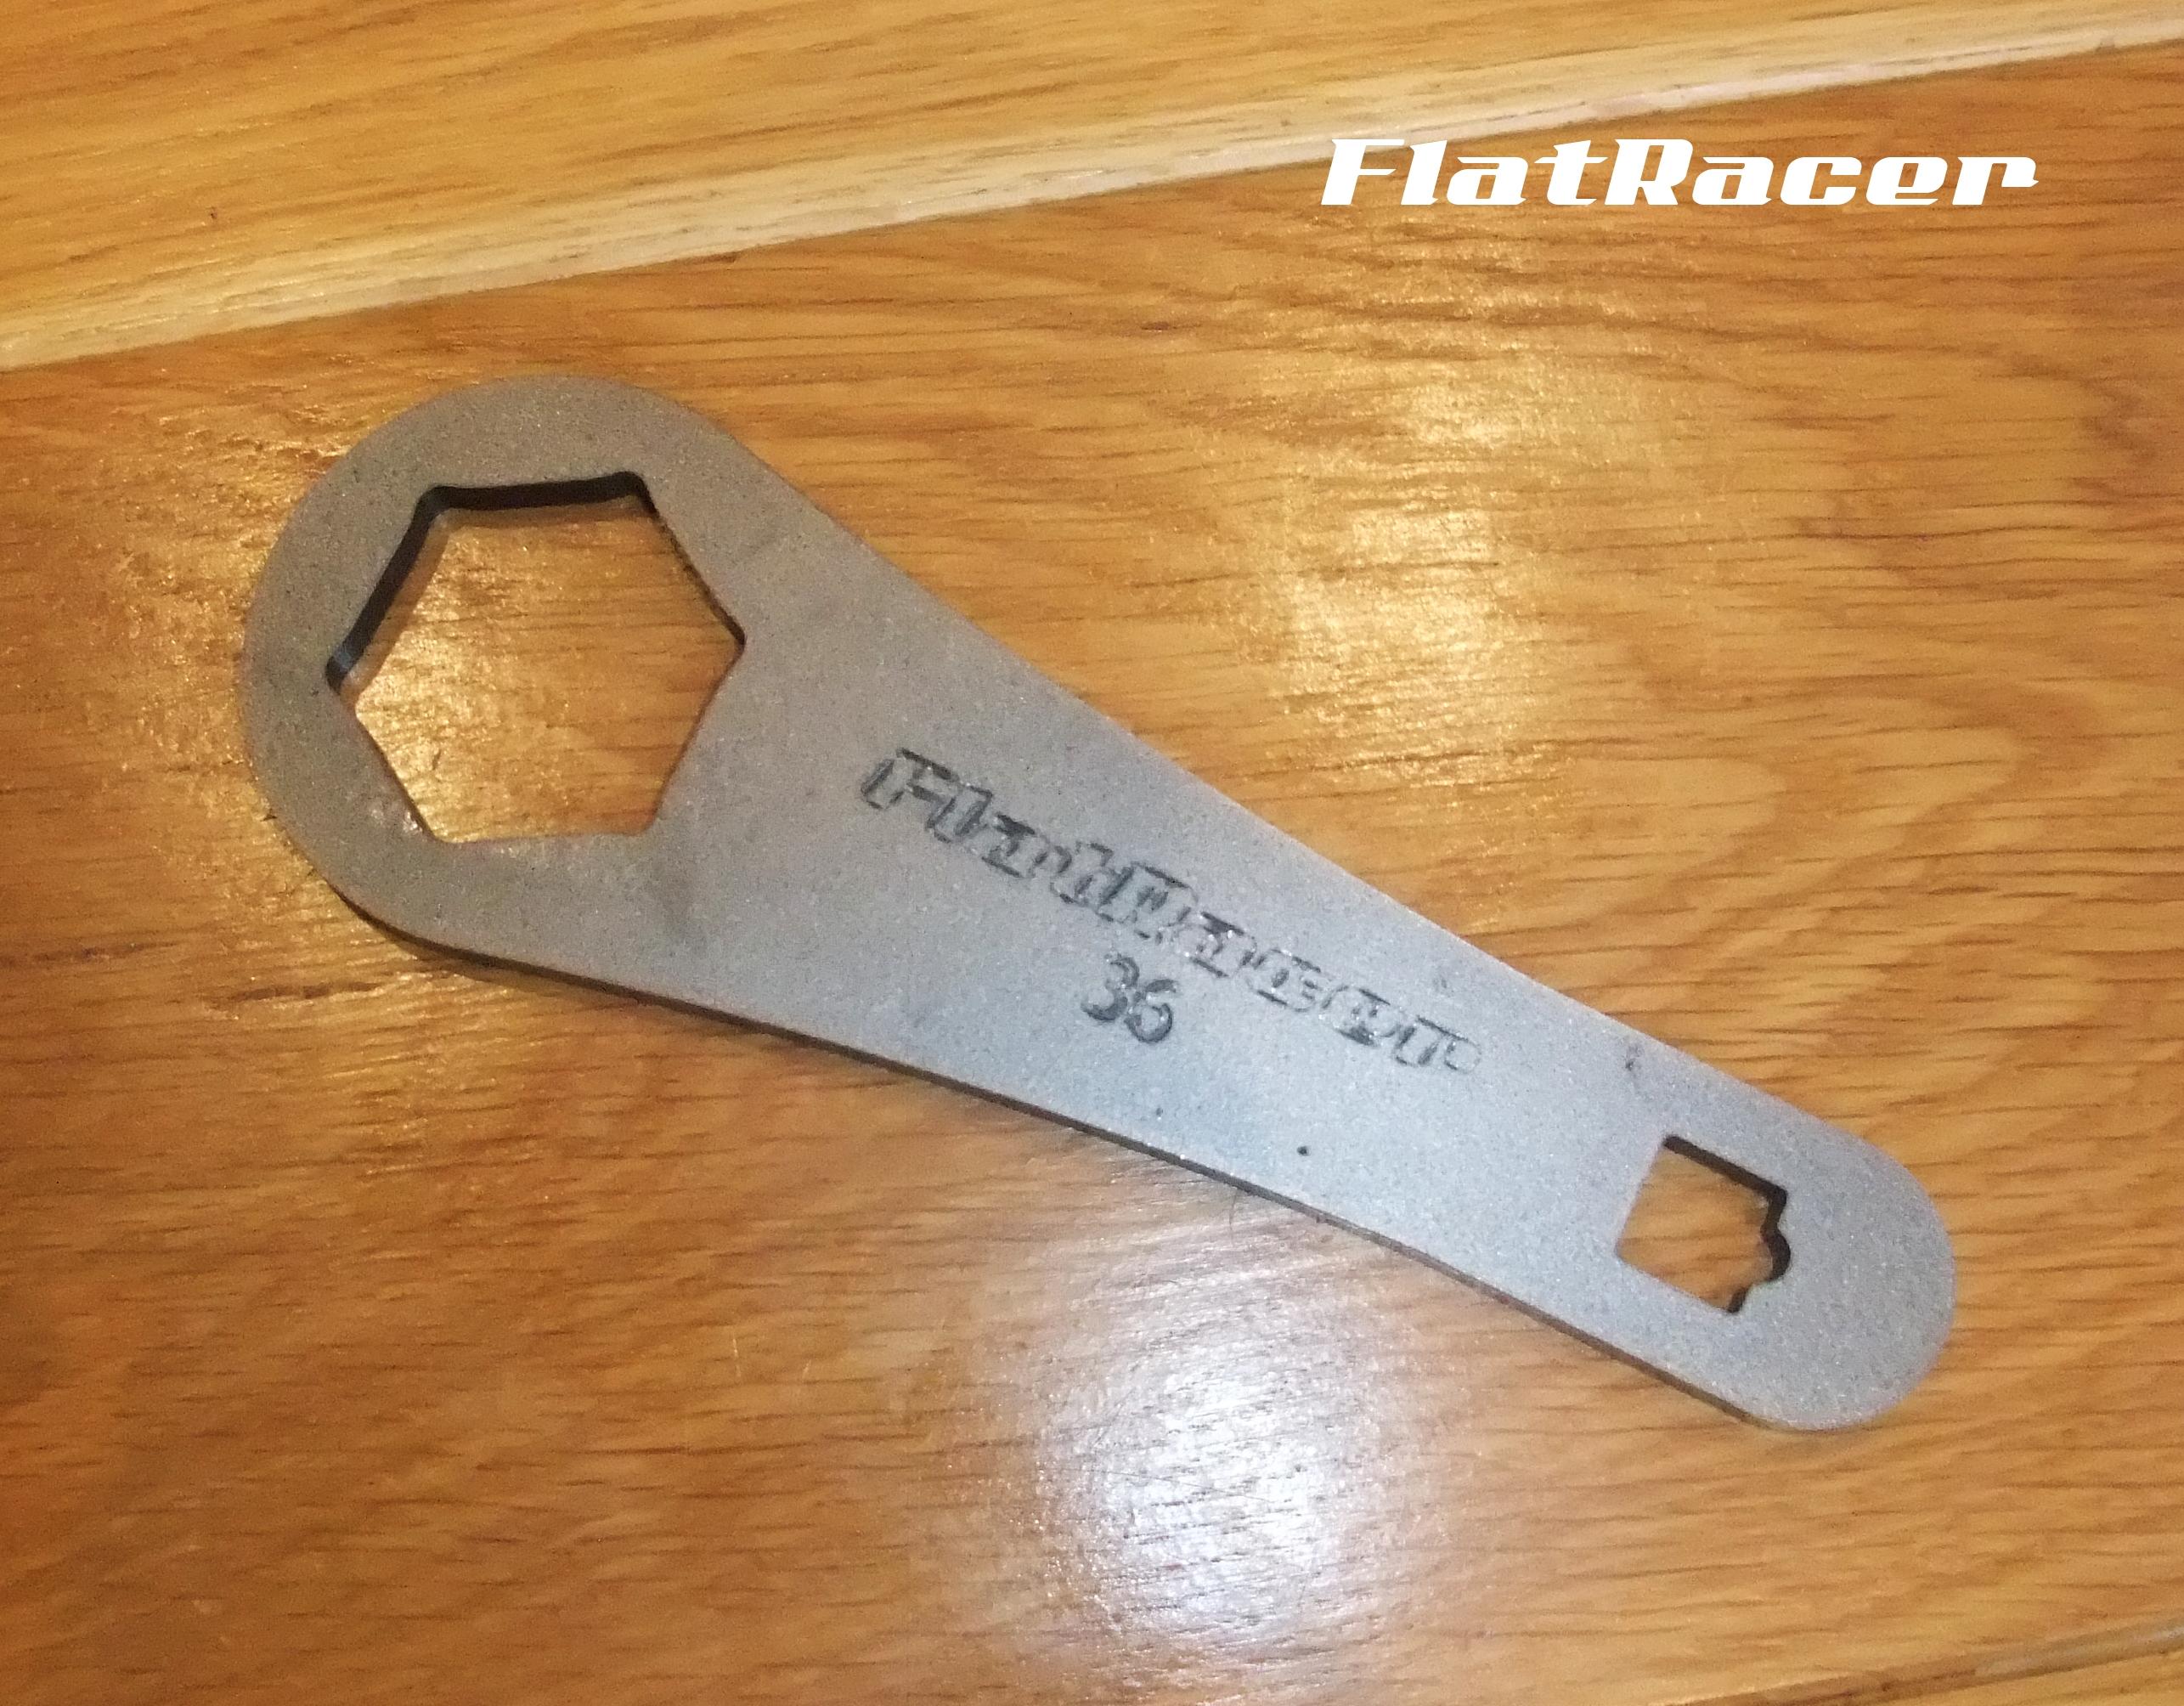 FlatRacer BMW Airhead Boxer steering & top nuts 36mm spanner tool 31-4-850